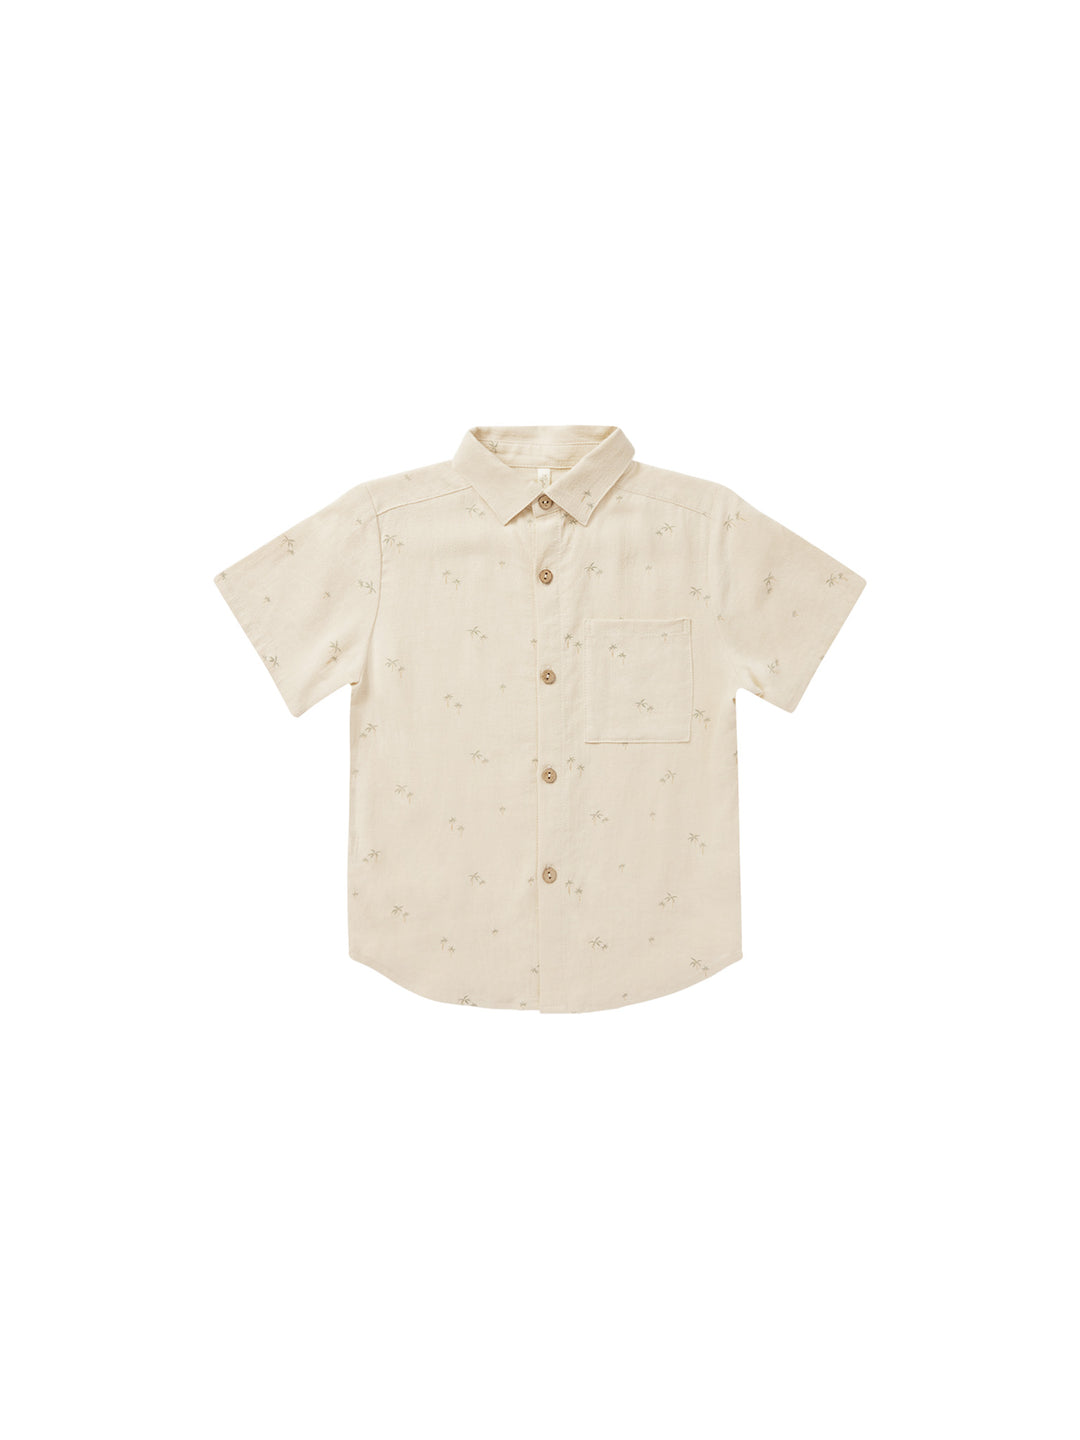 Palm Collared S/S Shirt